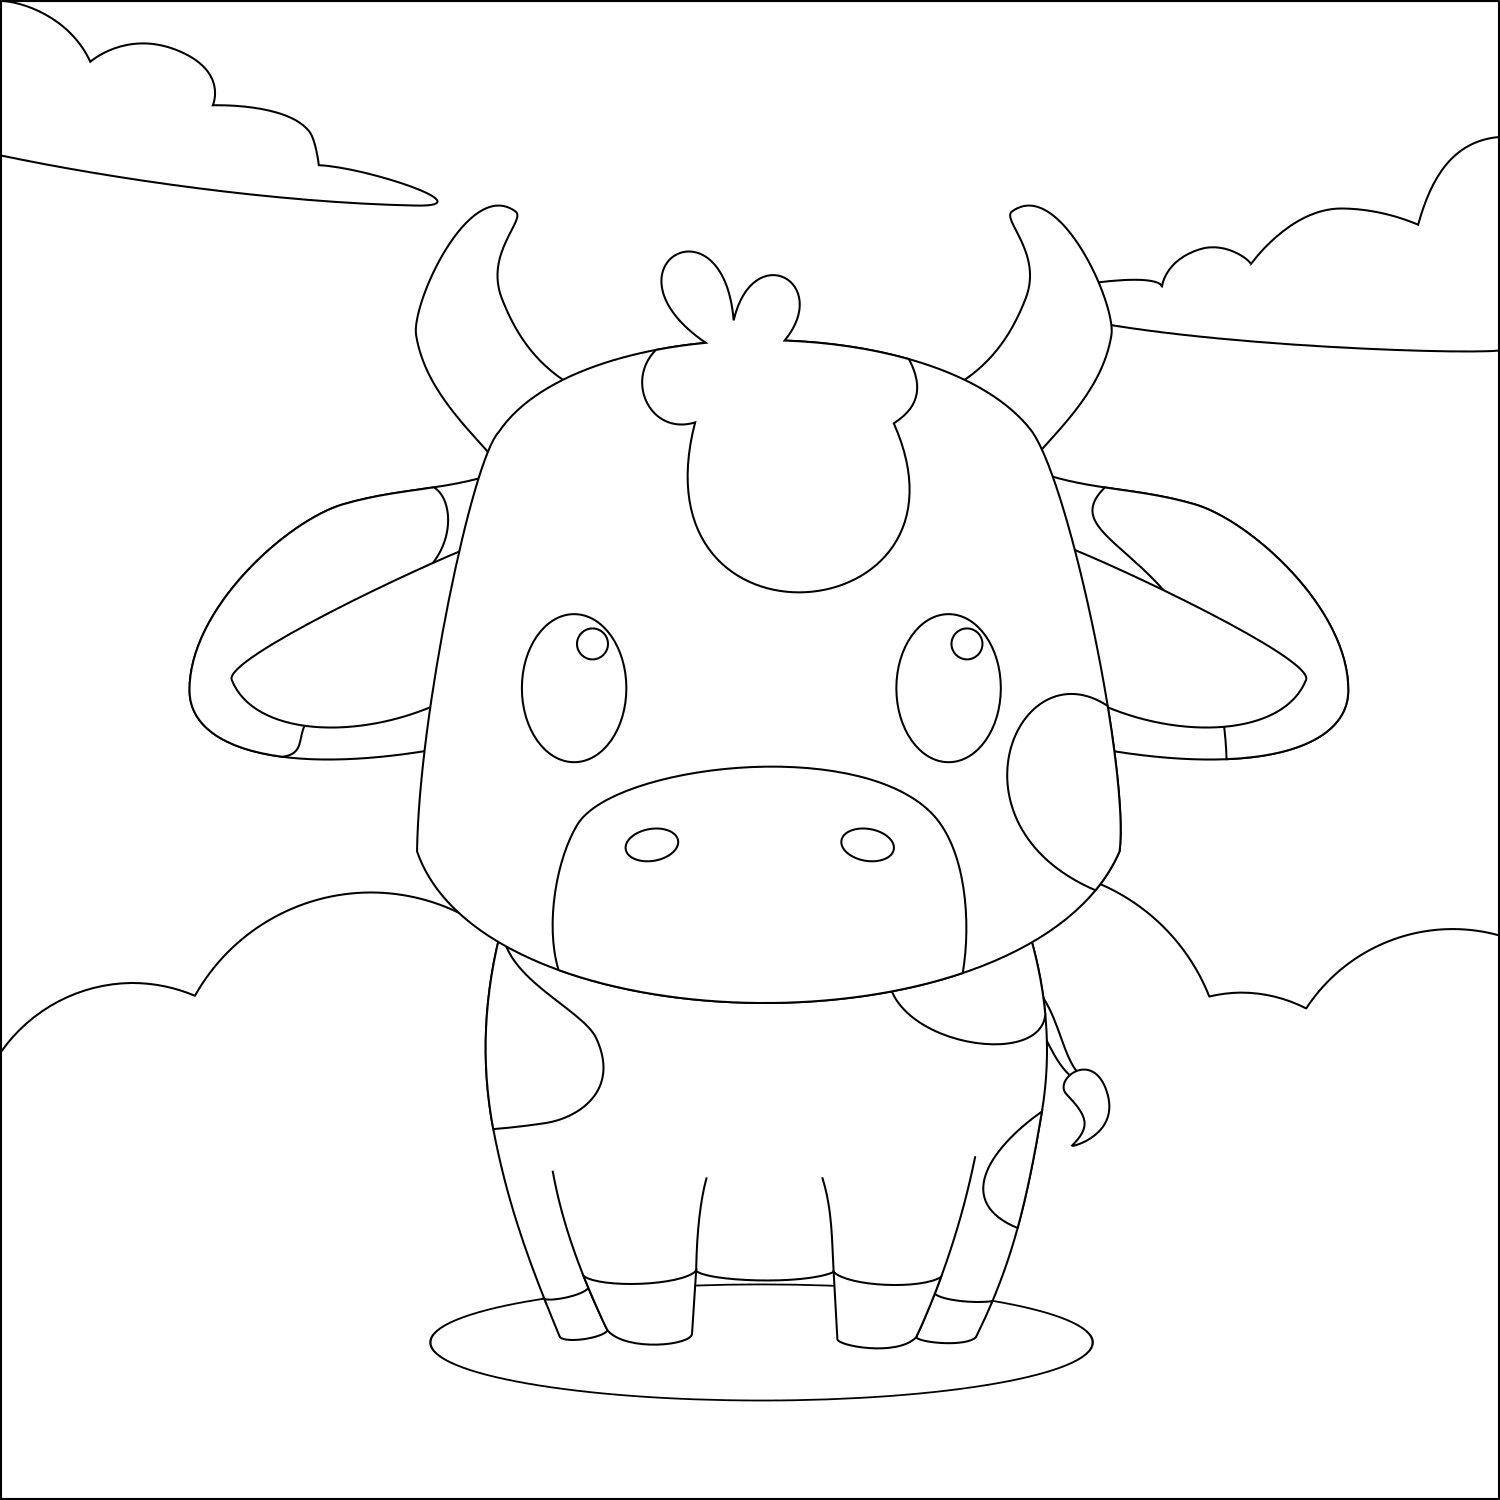 Little Calf – Colouring Page